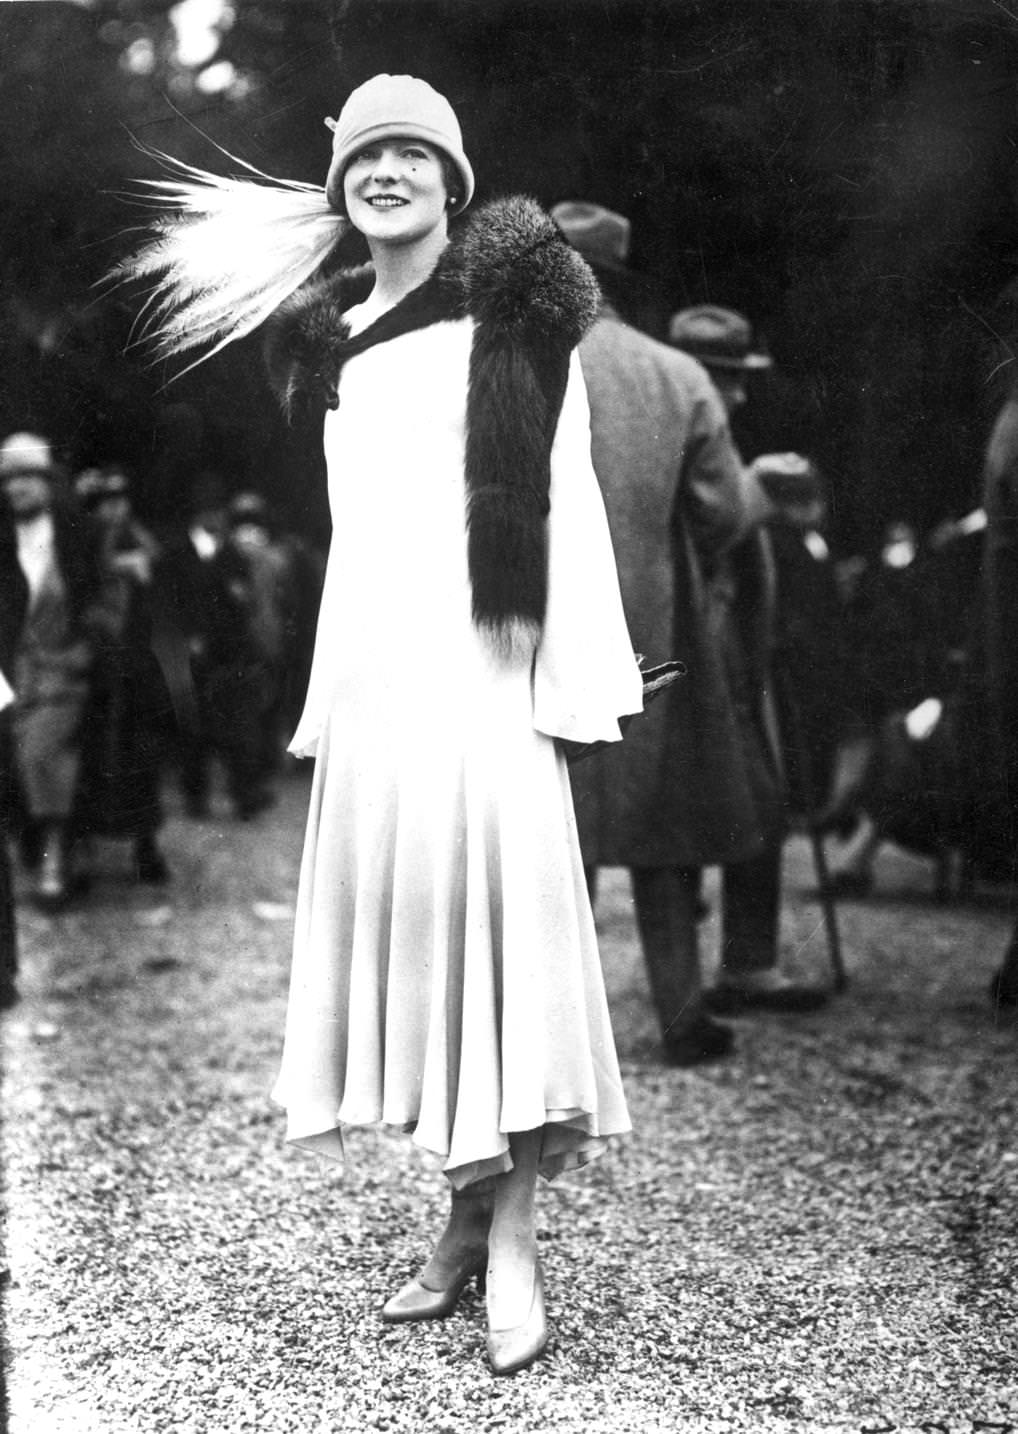 An elegant evening dress with a tapering uneven hemline and sleeves. A fur stole and hat with an array of long white feathers complete the look, 1925